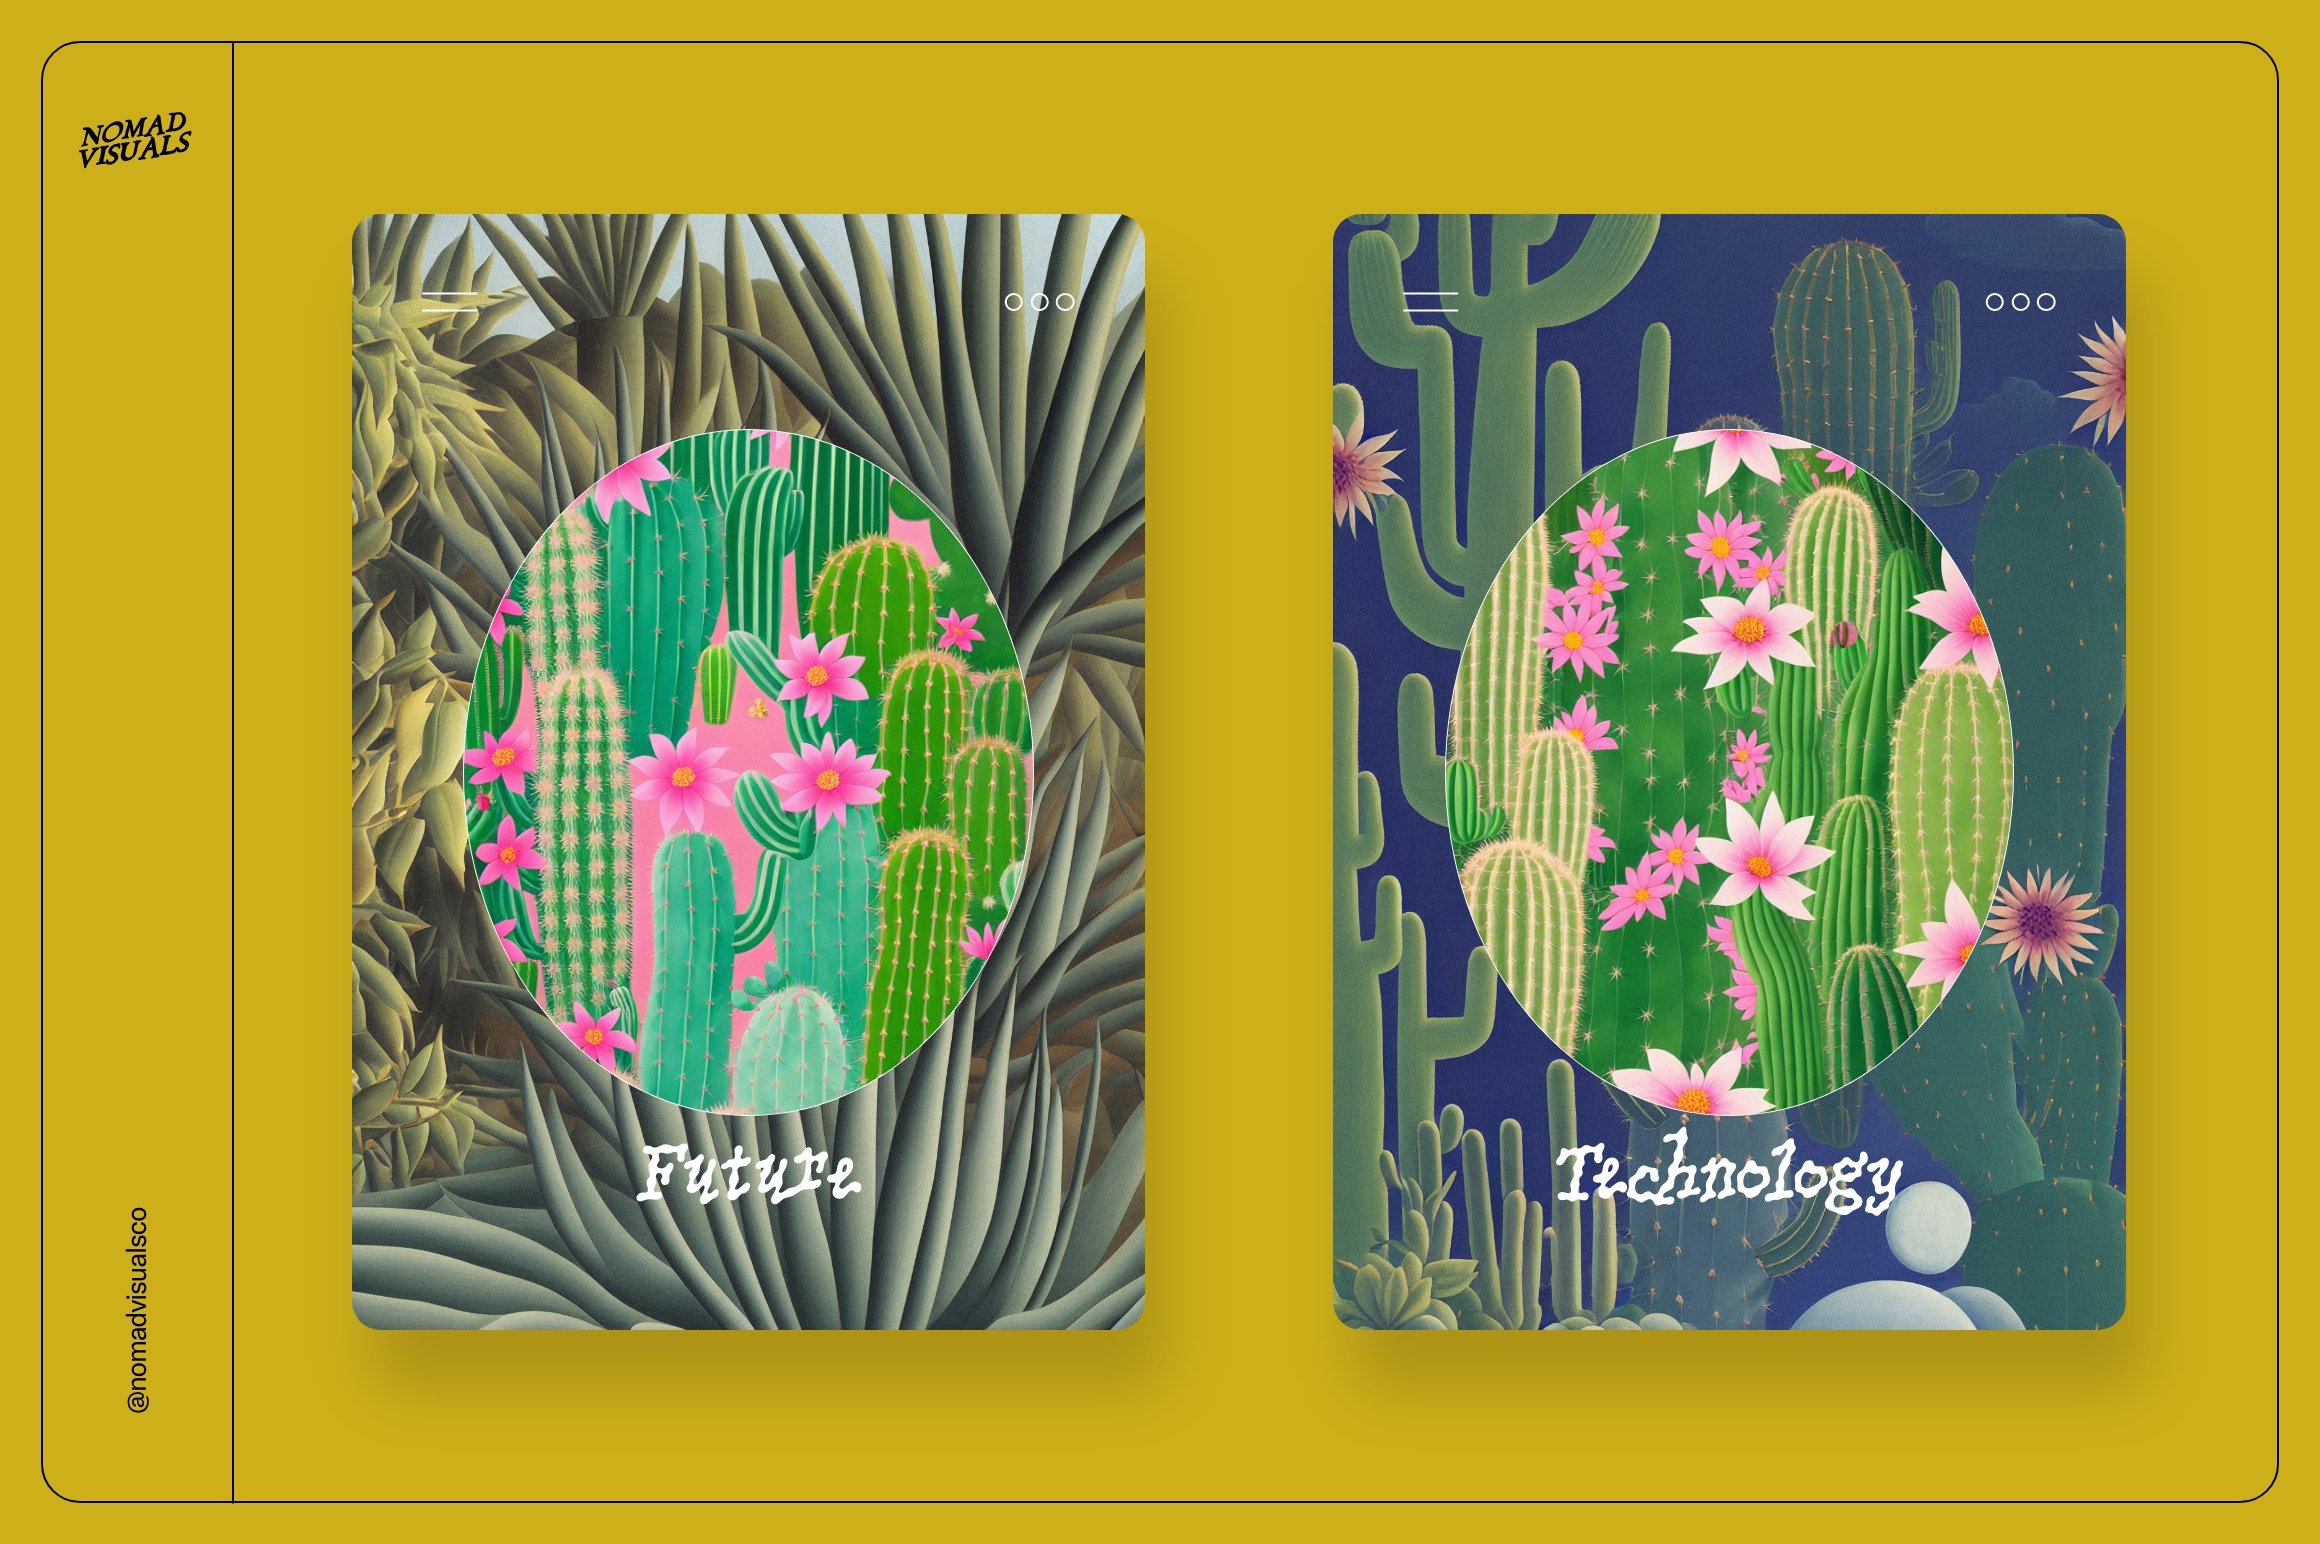 Couple of cards with cactus designs on them.